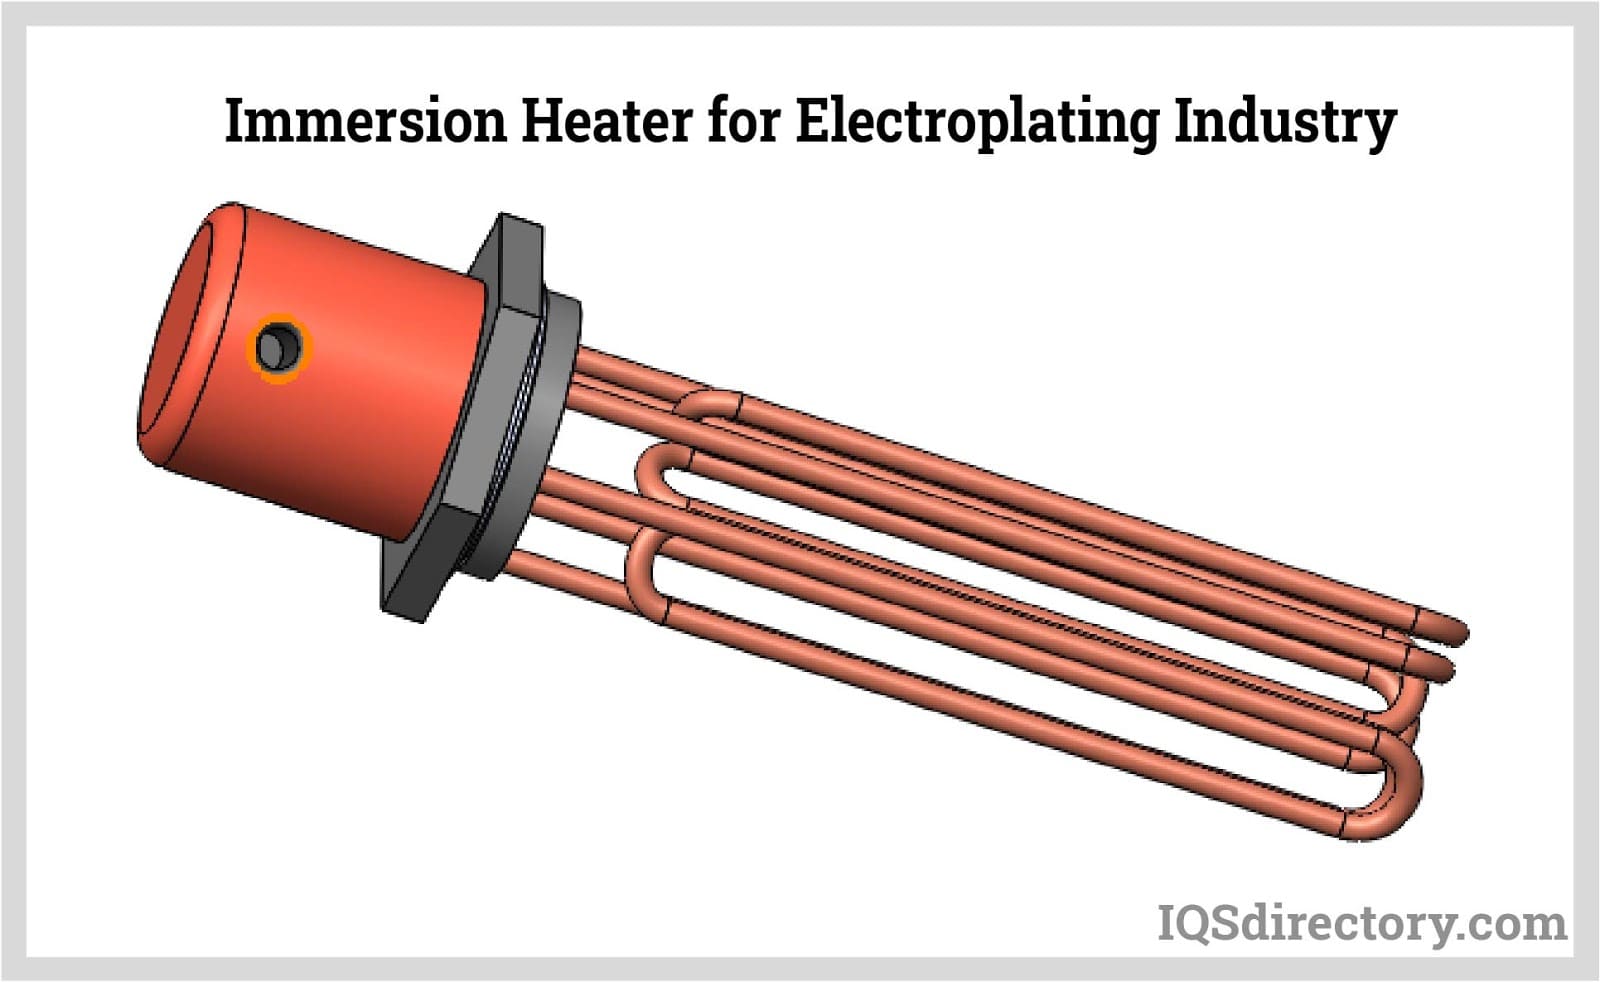 Immersion Heater for Electroplating Industry